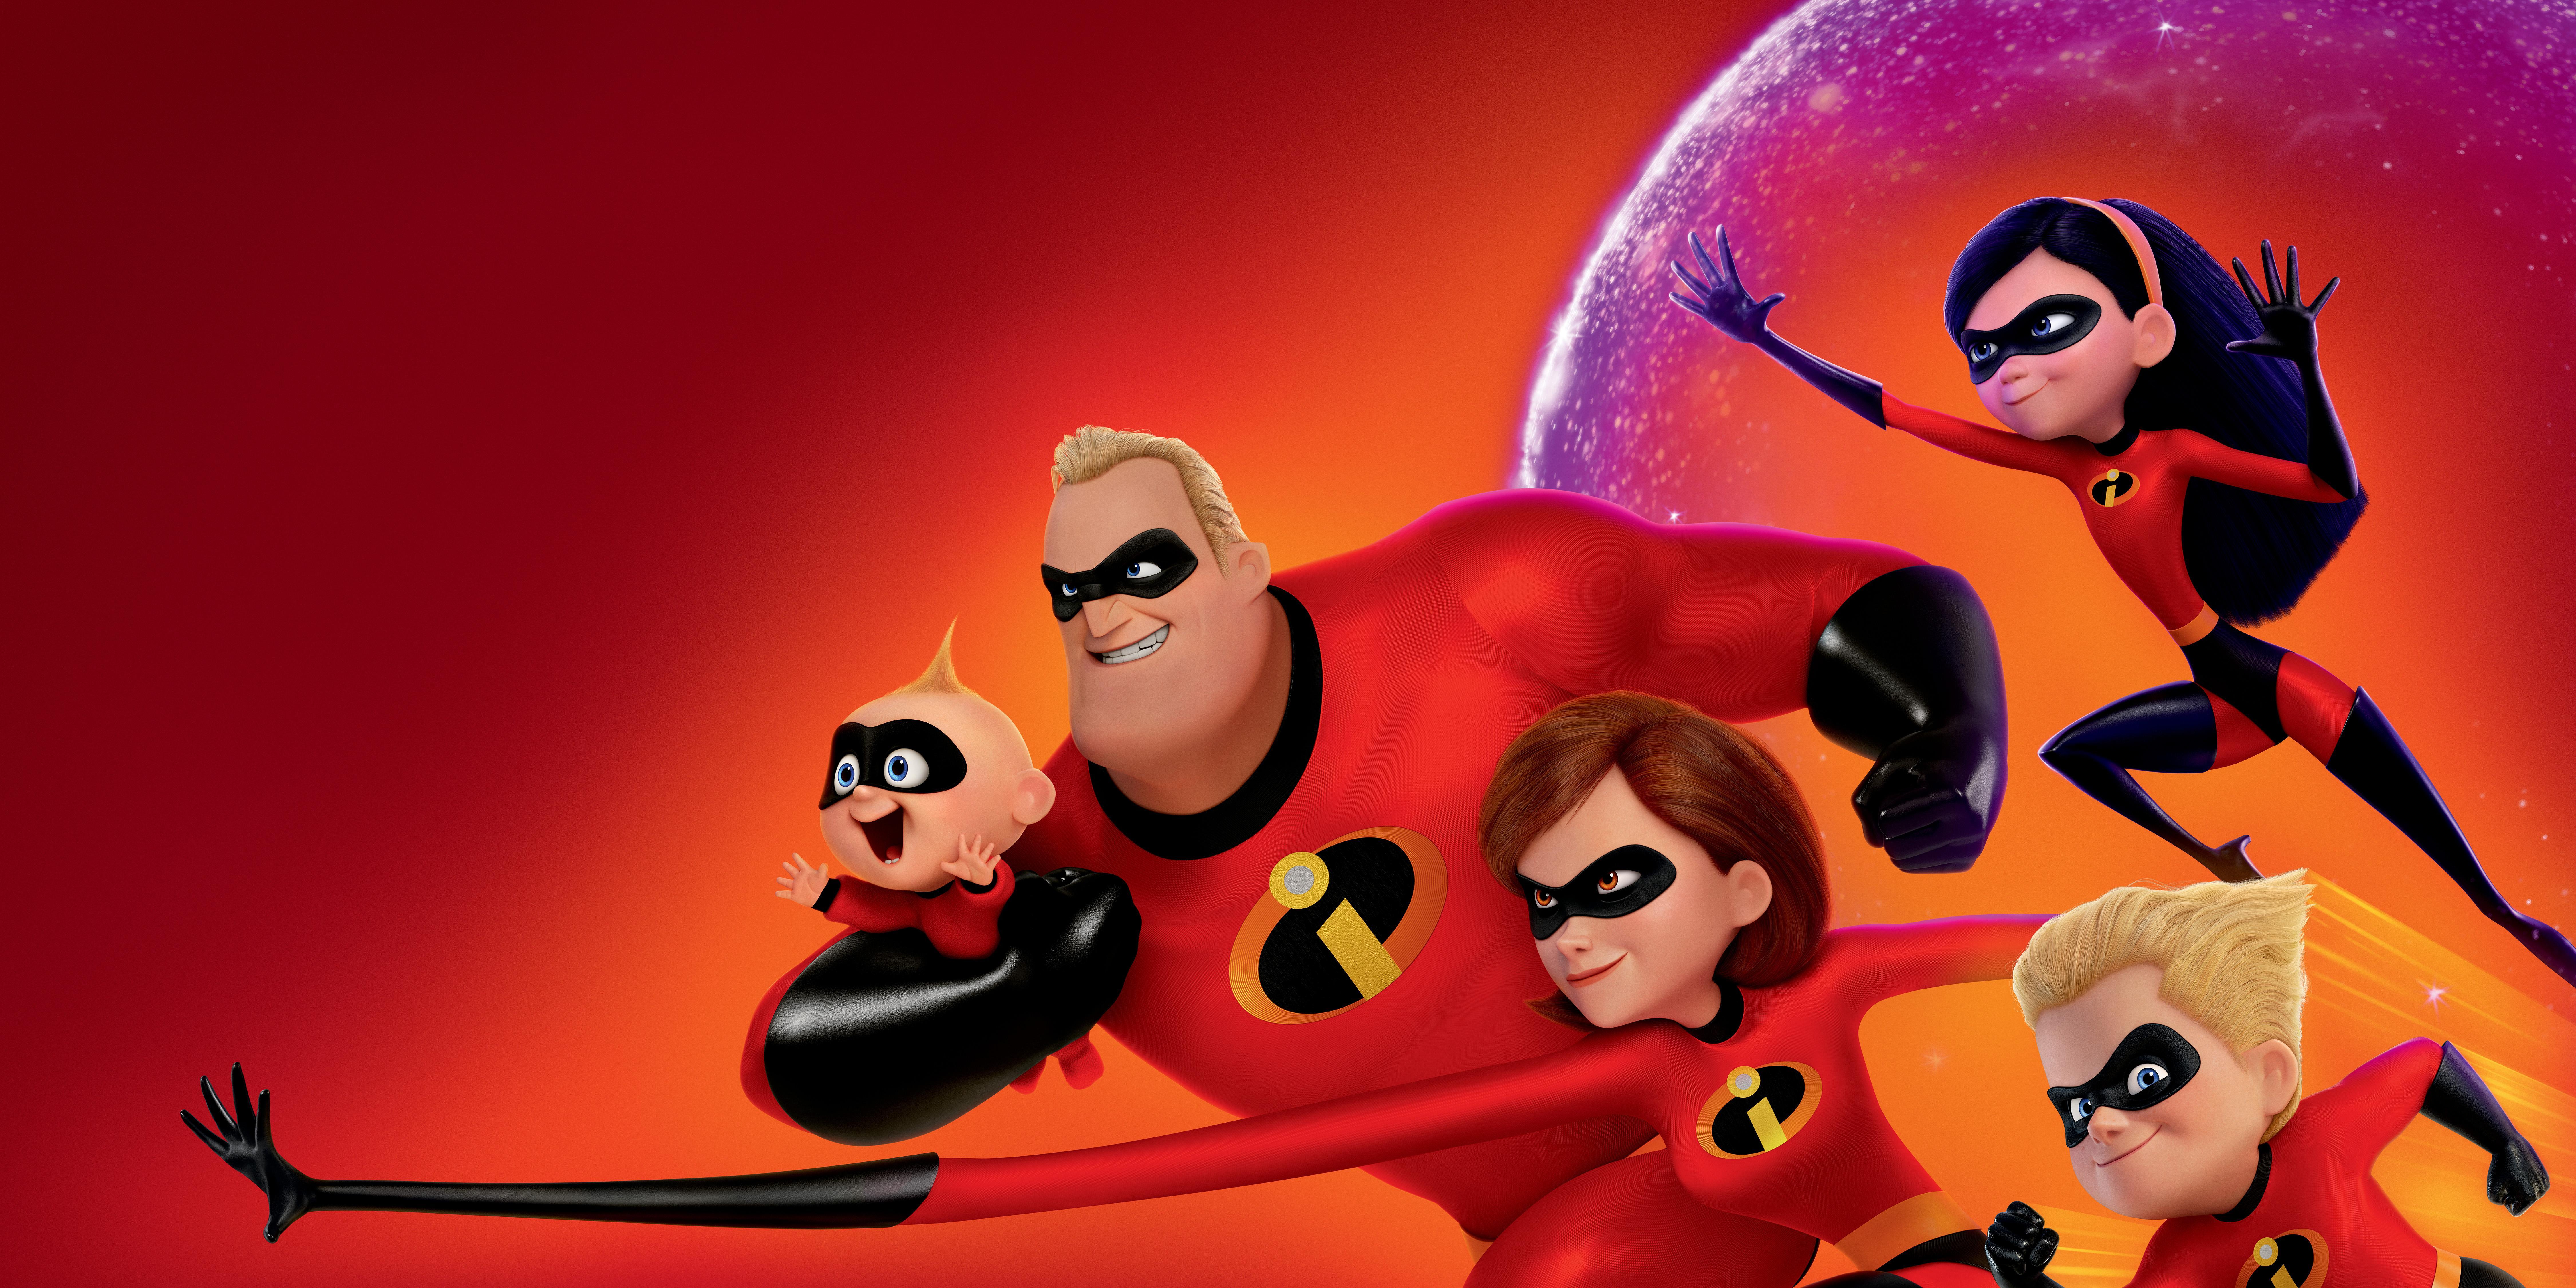 Incredibles 2 8k Ultra HD Wallpaper. Background Imagex4500